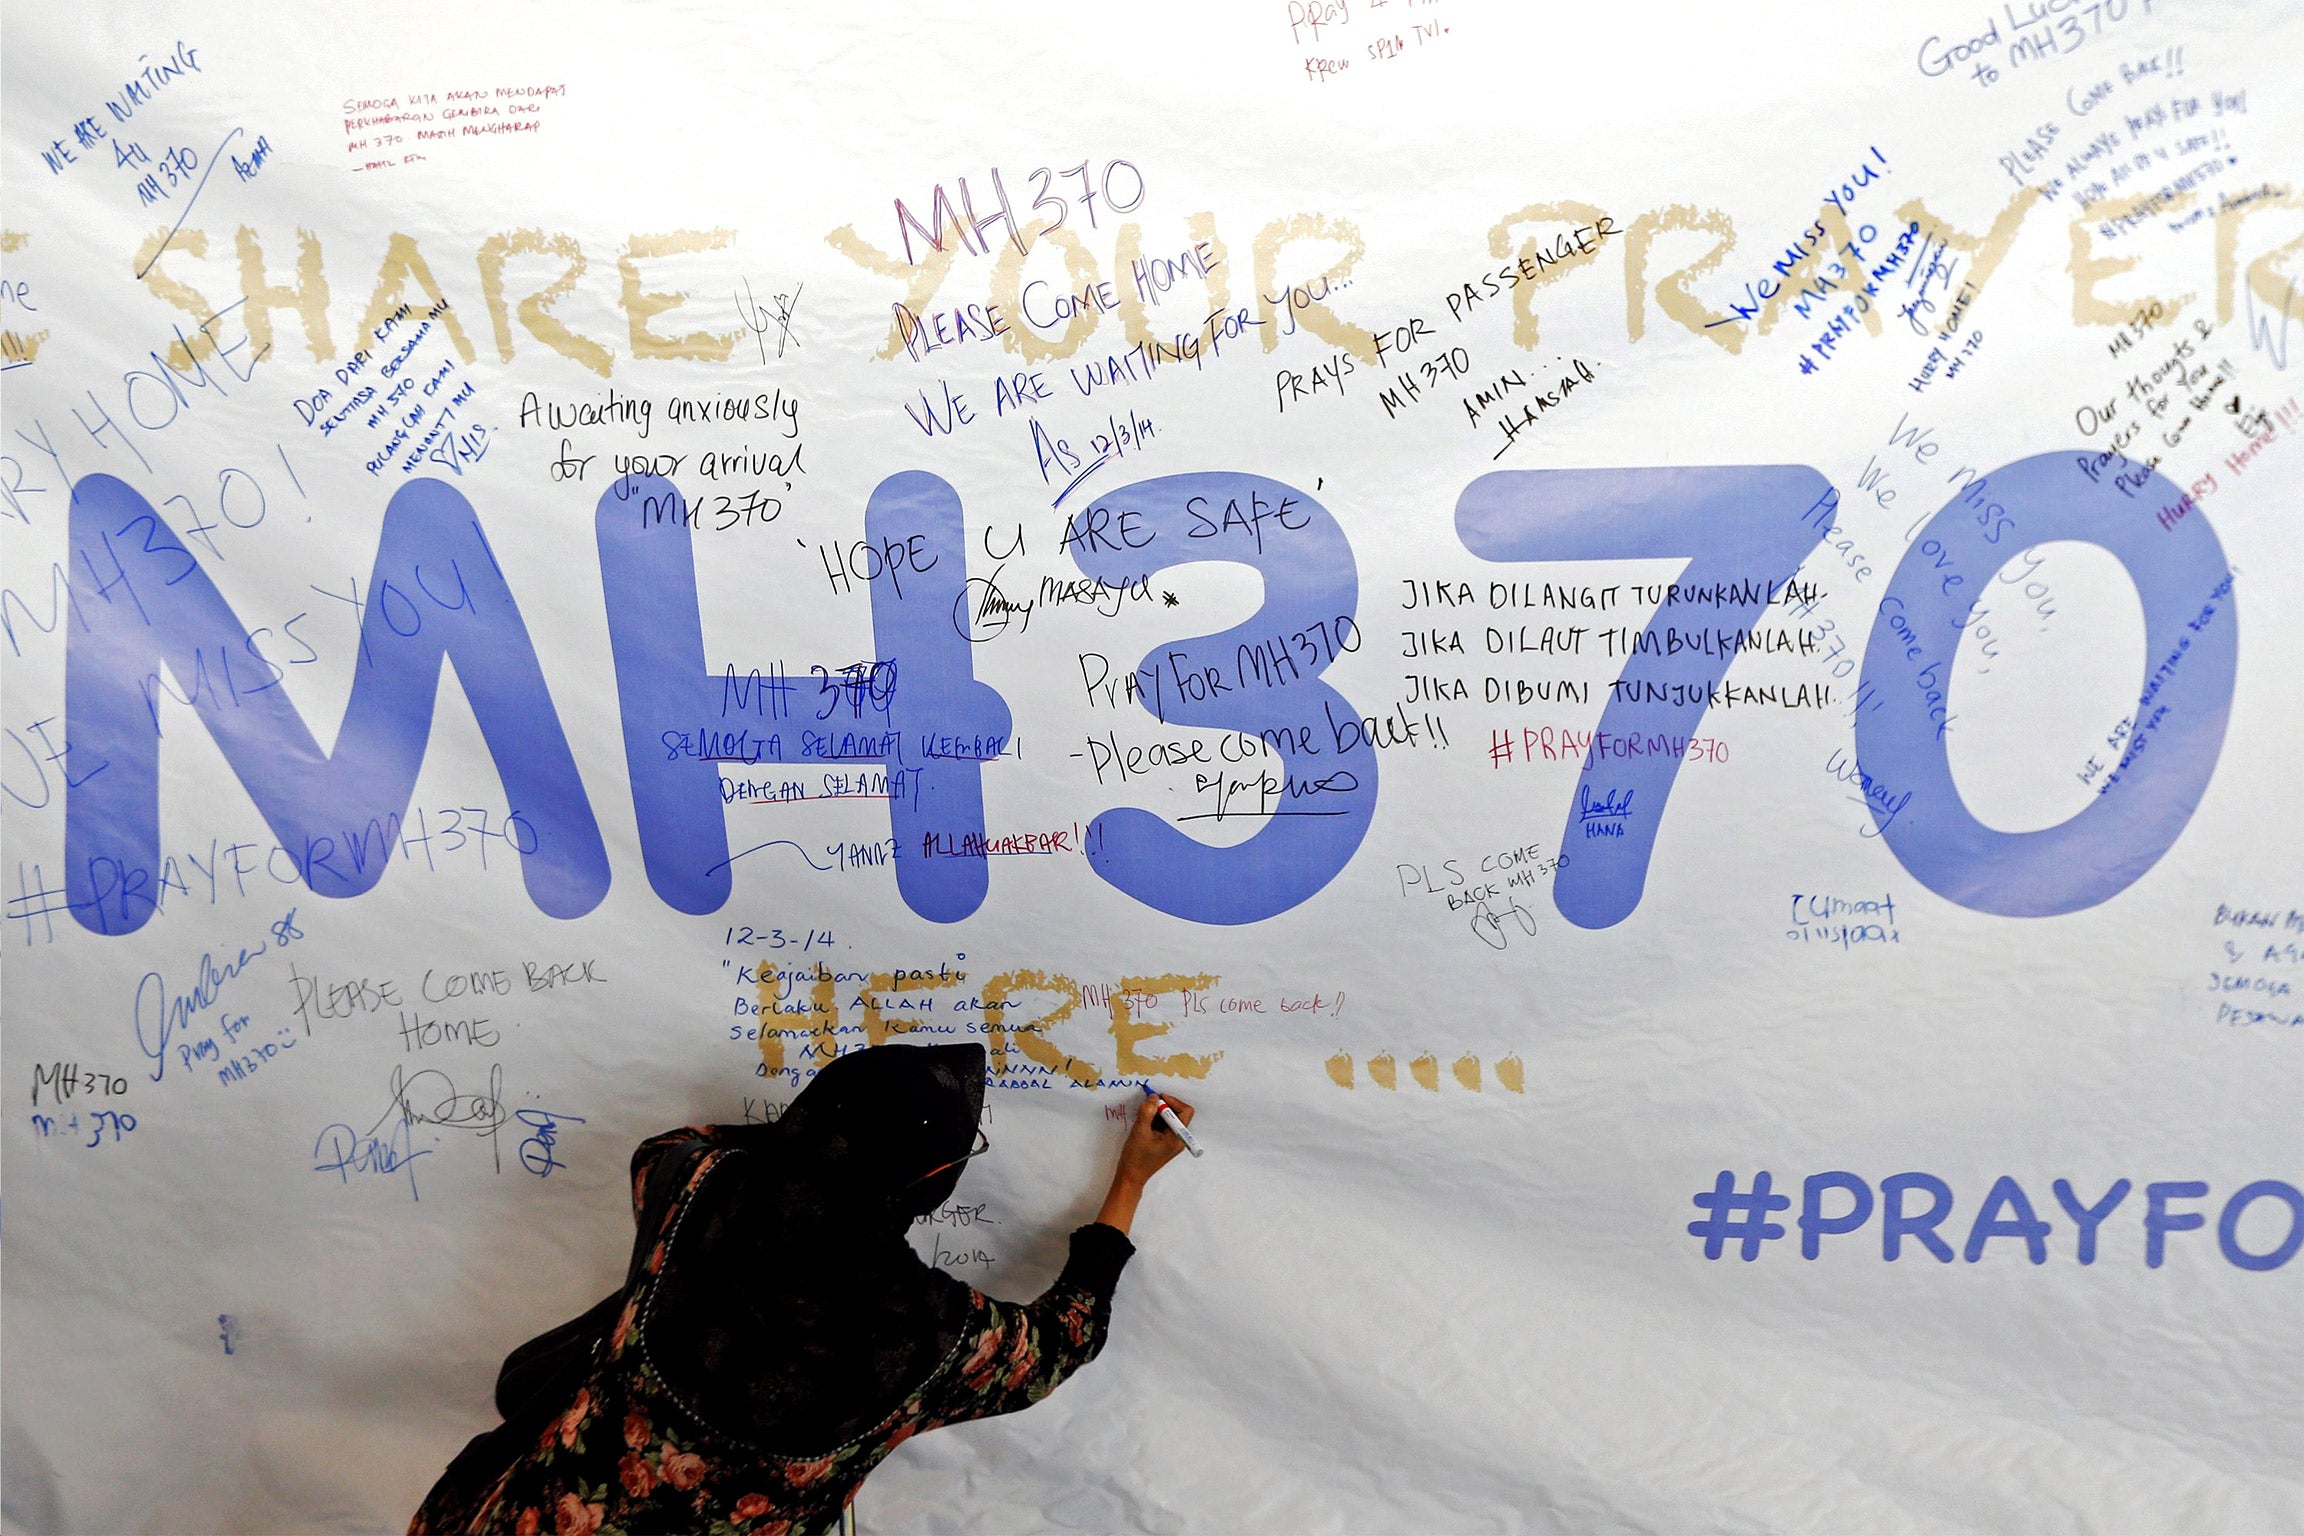 A woman writes a message of support and hope for the passengers of the missing Malaysia Airlines MH370 on a banner at Kuala Lumpur International Airport